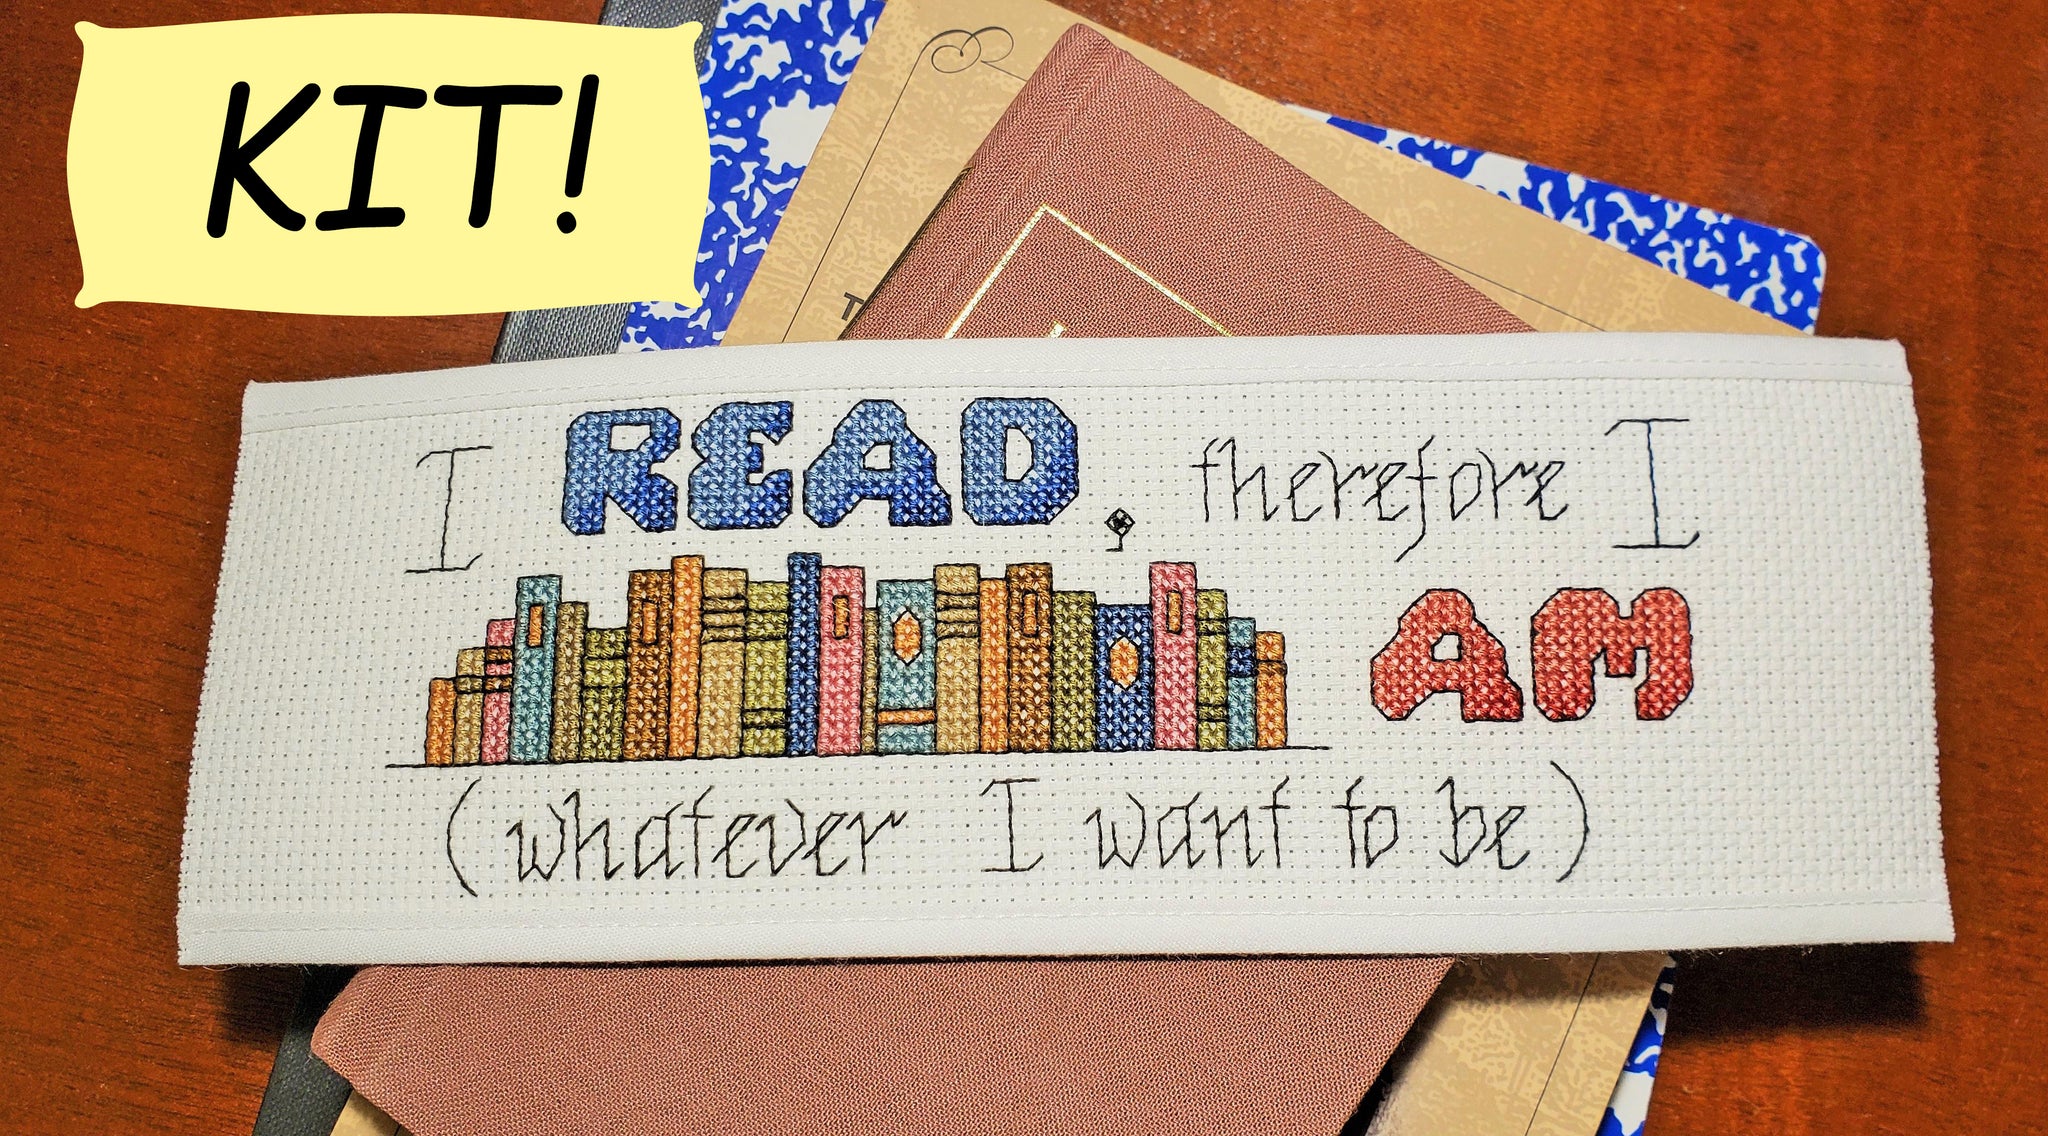 I Read, Therefore I Am - Cross Stitch Kit